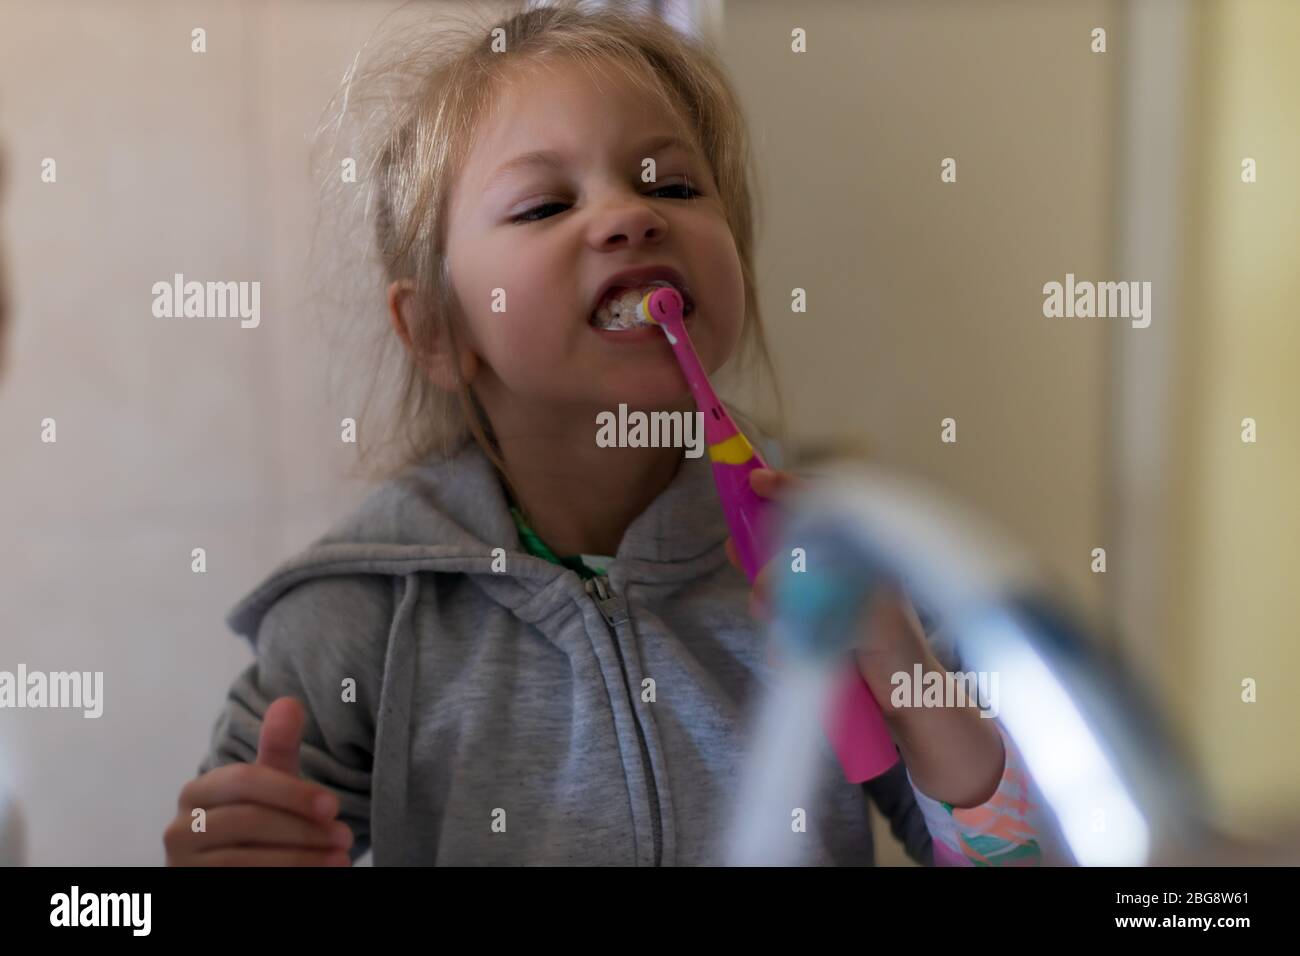 Emotional close up of a cute little girl brushing teeth with electric toothbrush Stock Photo